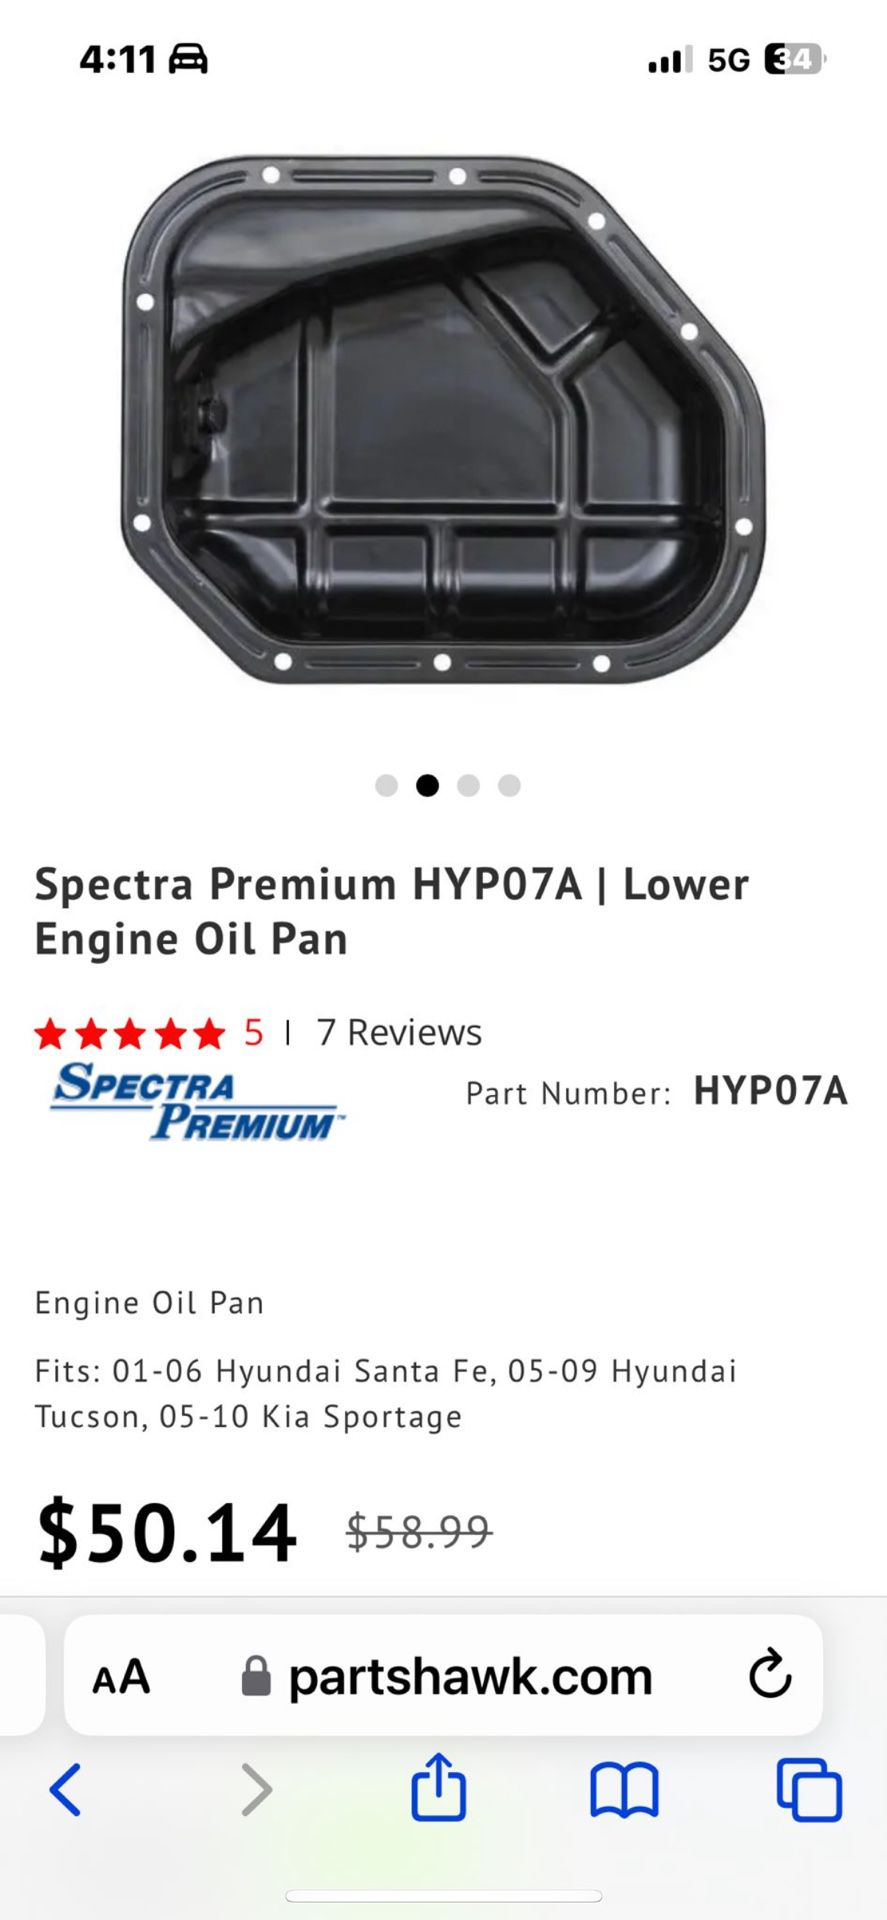 Spectra Premium HYP07A | Lower Engine Oil Pan